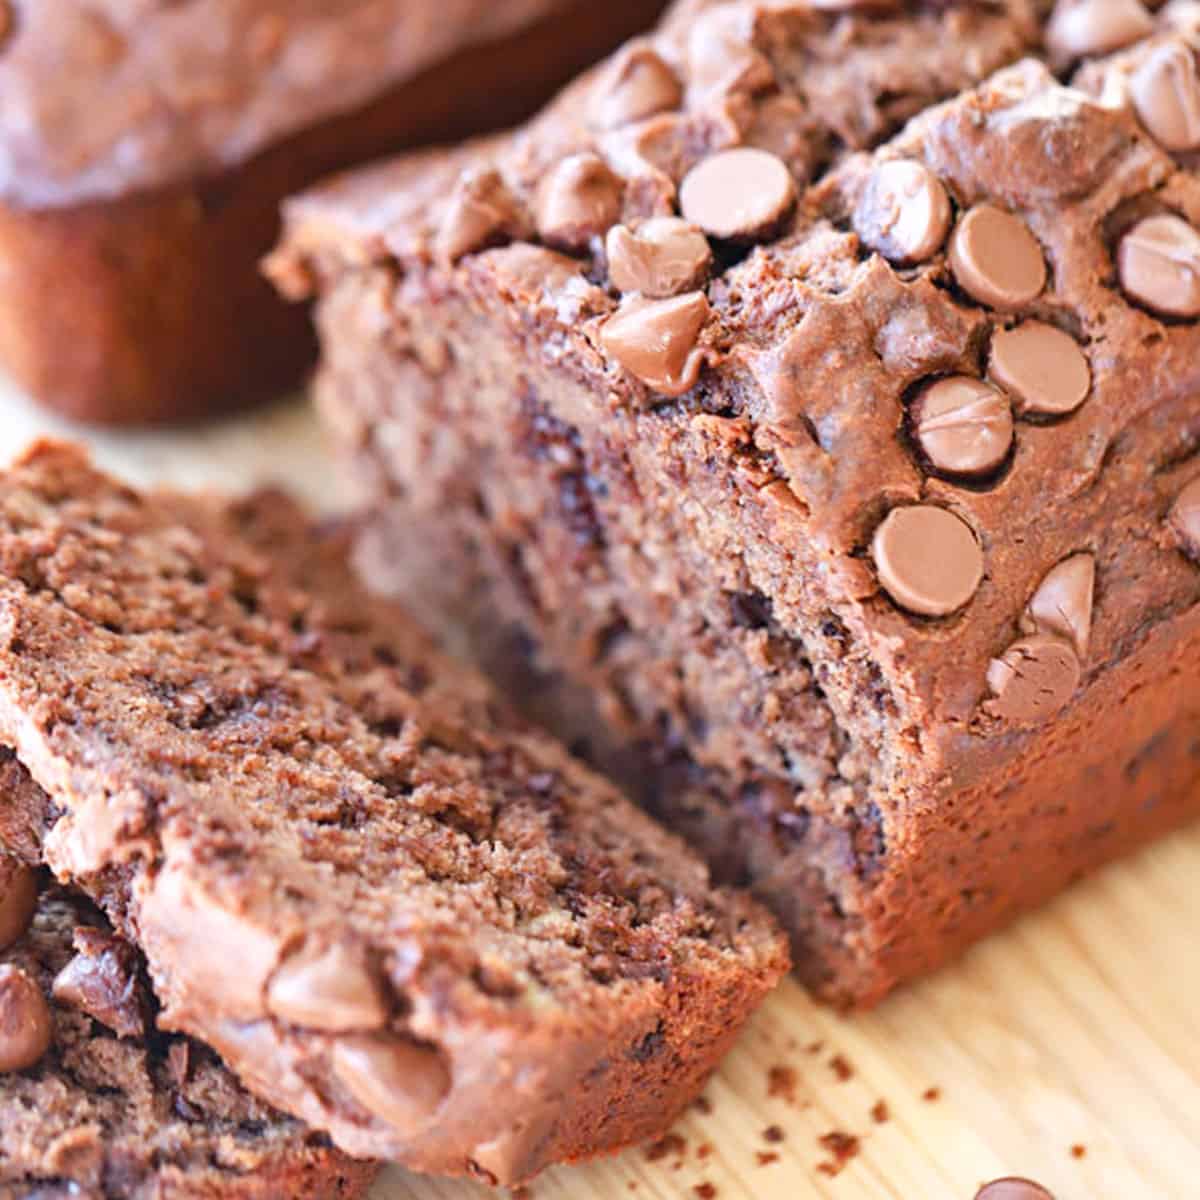 chocolate banana bread with chocolate chips, banana bread with chocolate chips.